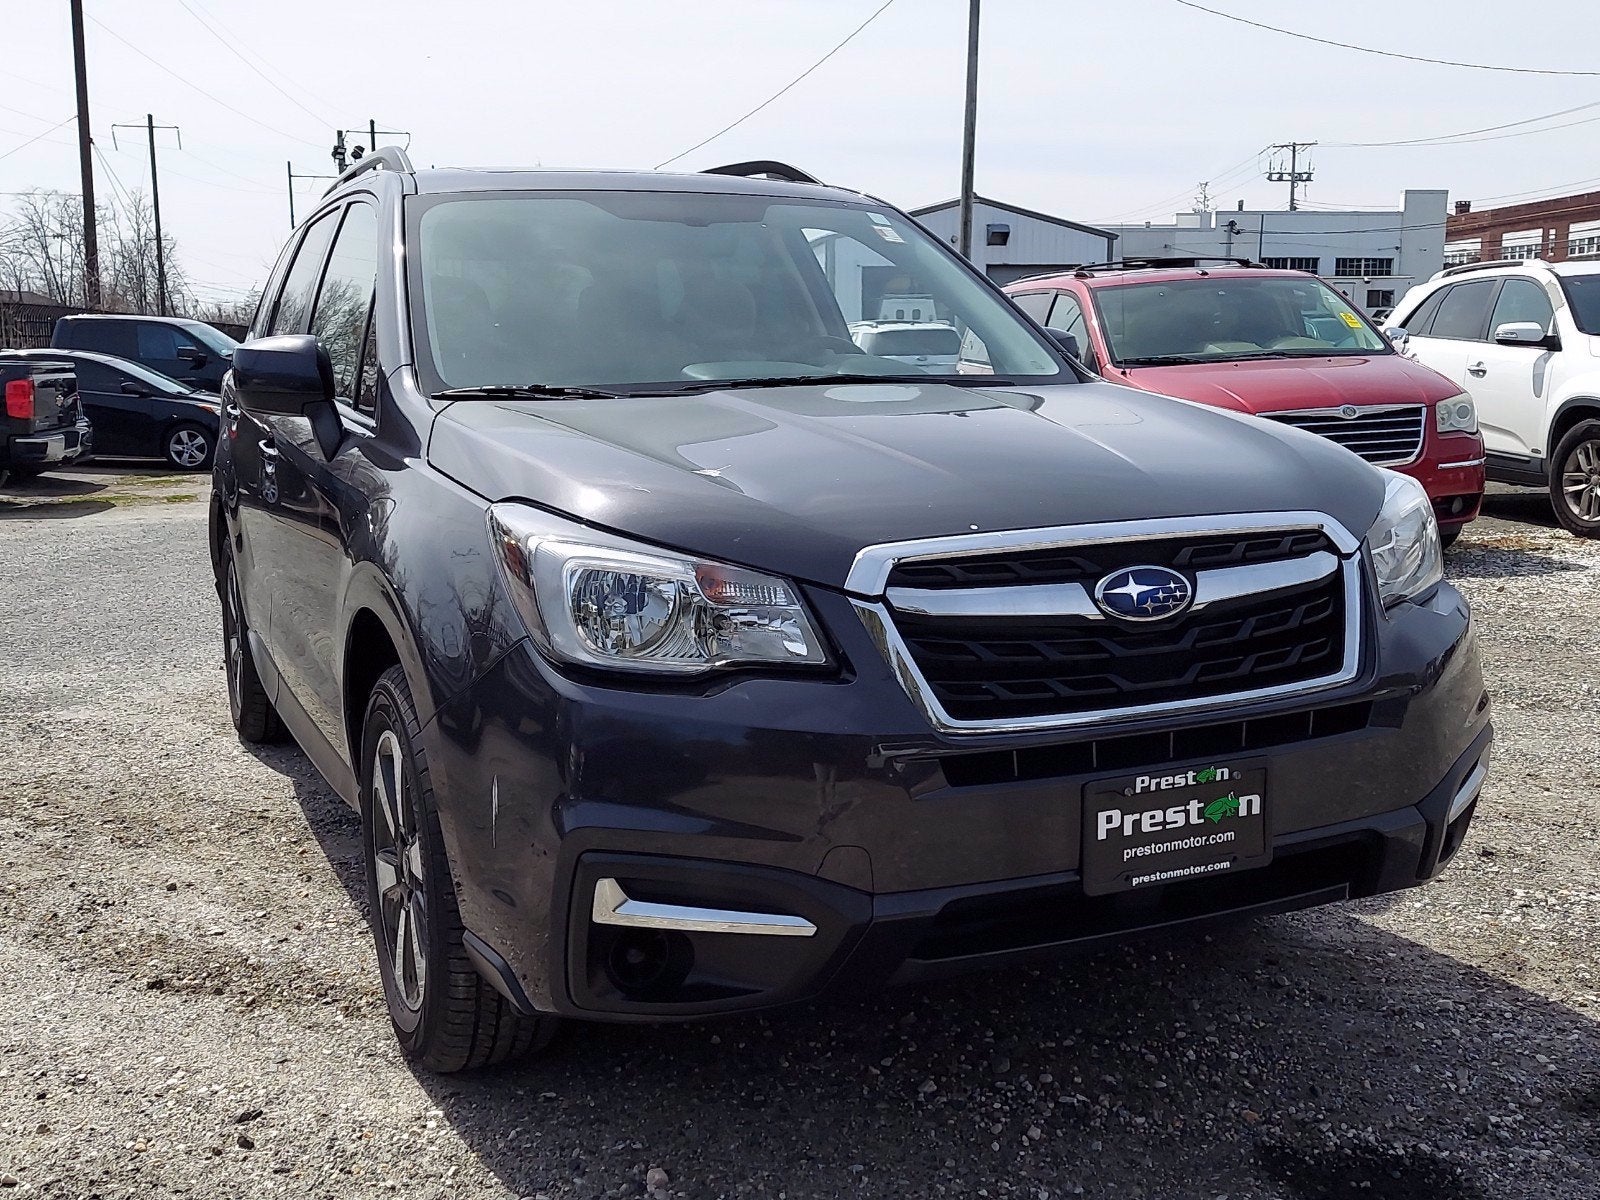 2018 Subaru Forester 2.5i Premium Aberdeen, MD MD | Bel Air, MD White Marsh, MD Wilmington, DE 2018 Subaru Forester 2.5 I Towing Capacity